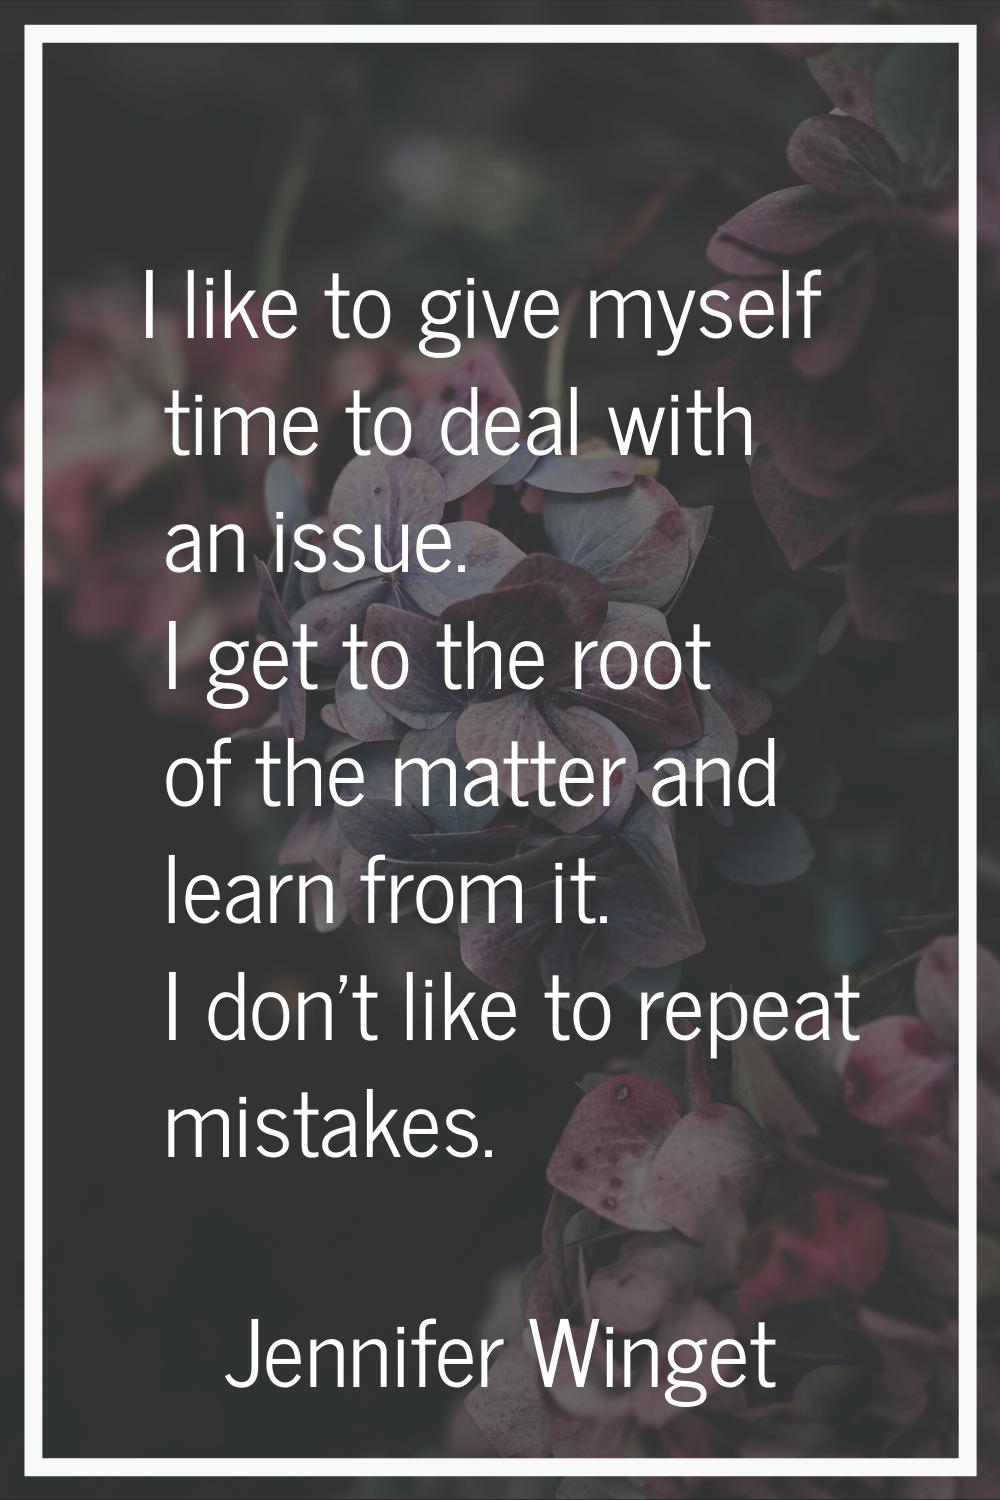 I like to give myself time to deal with an issue. I get to the root of the matter and learn from it